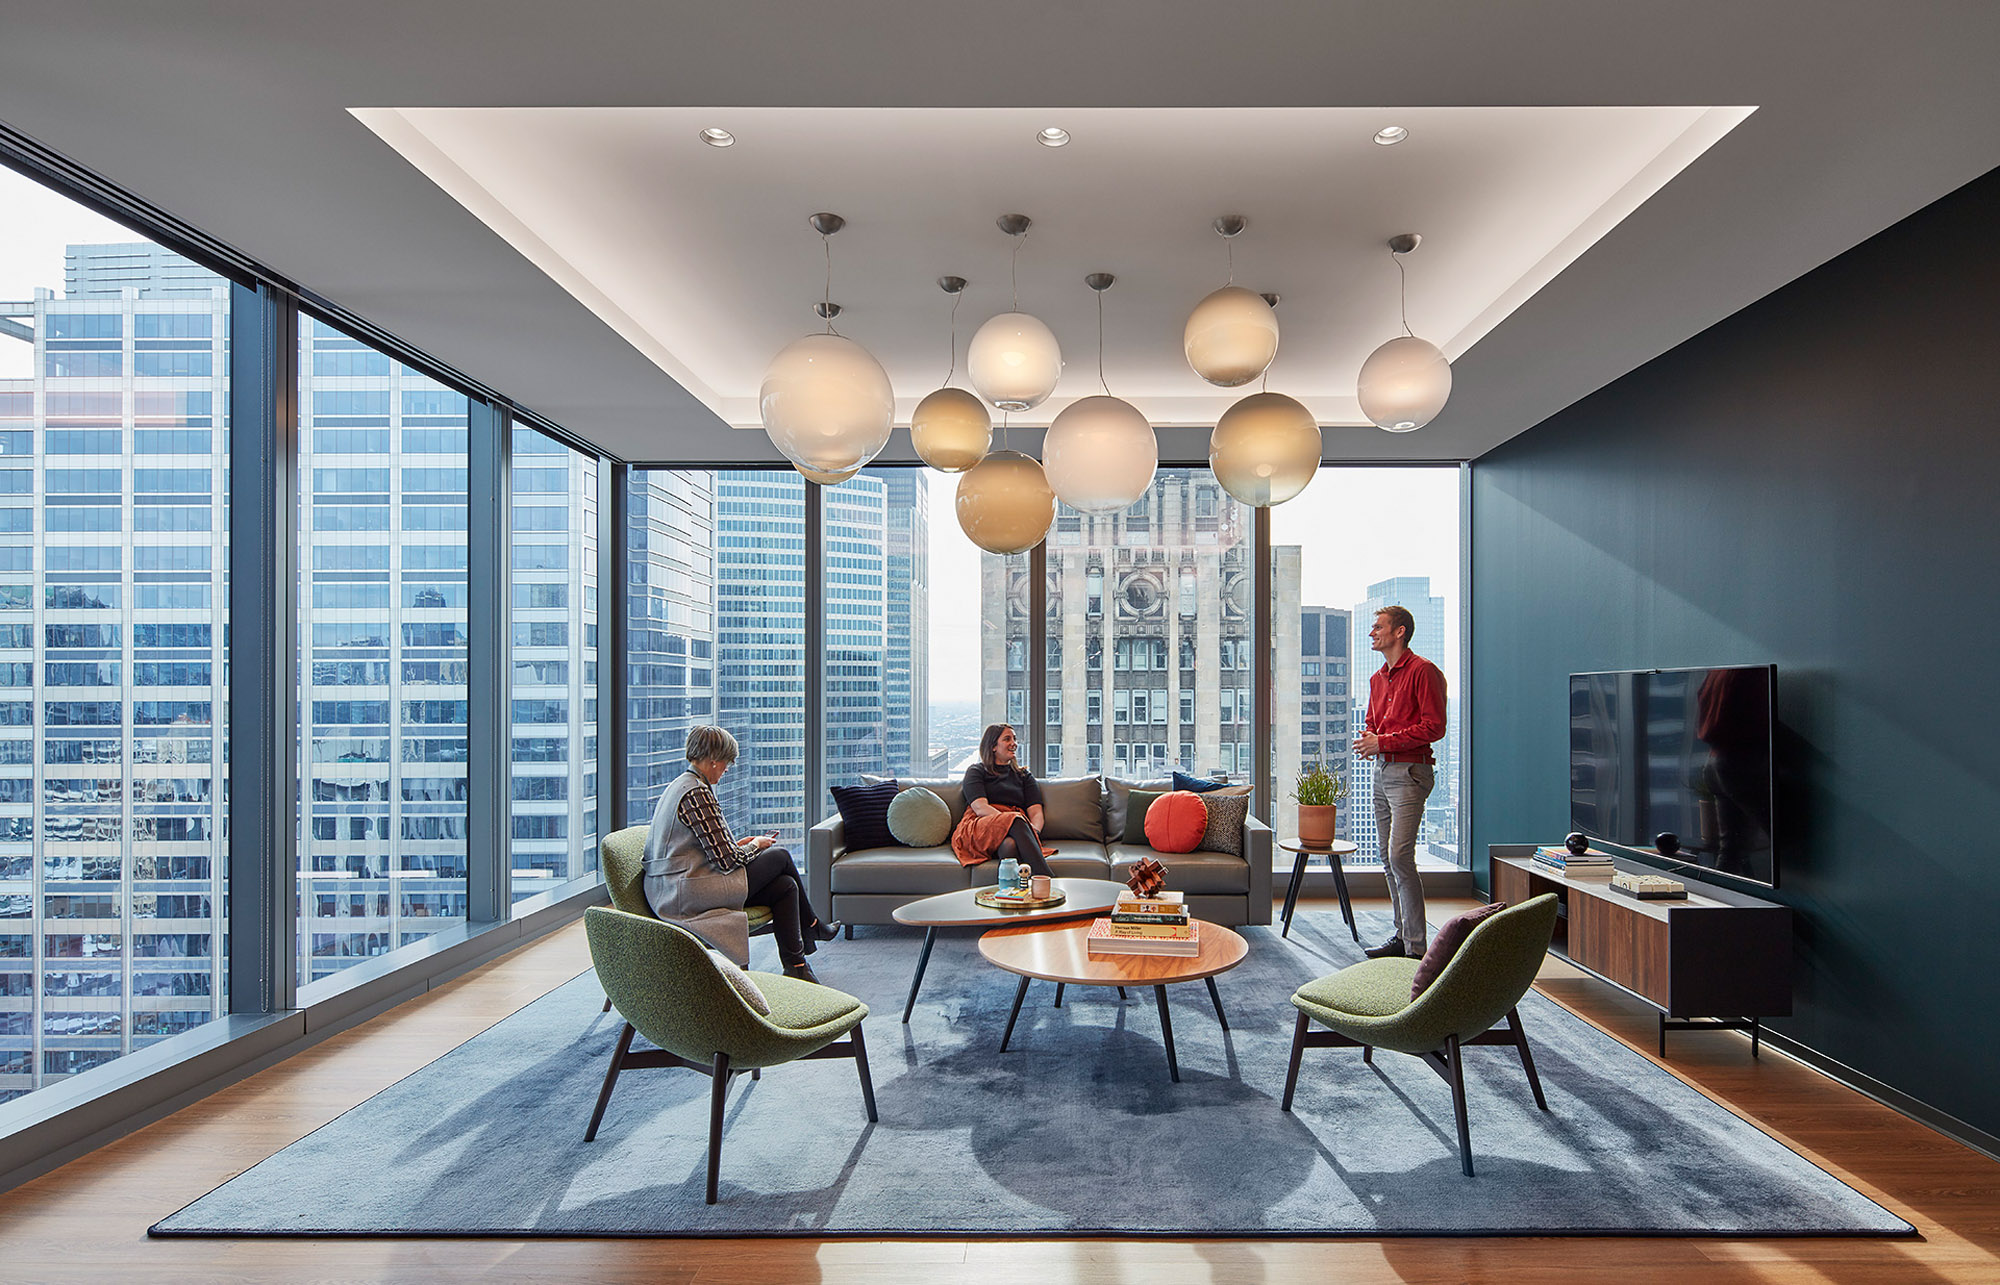 Work Design: The future of law offices does without hierarchical spaces